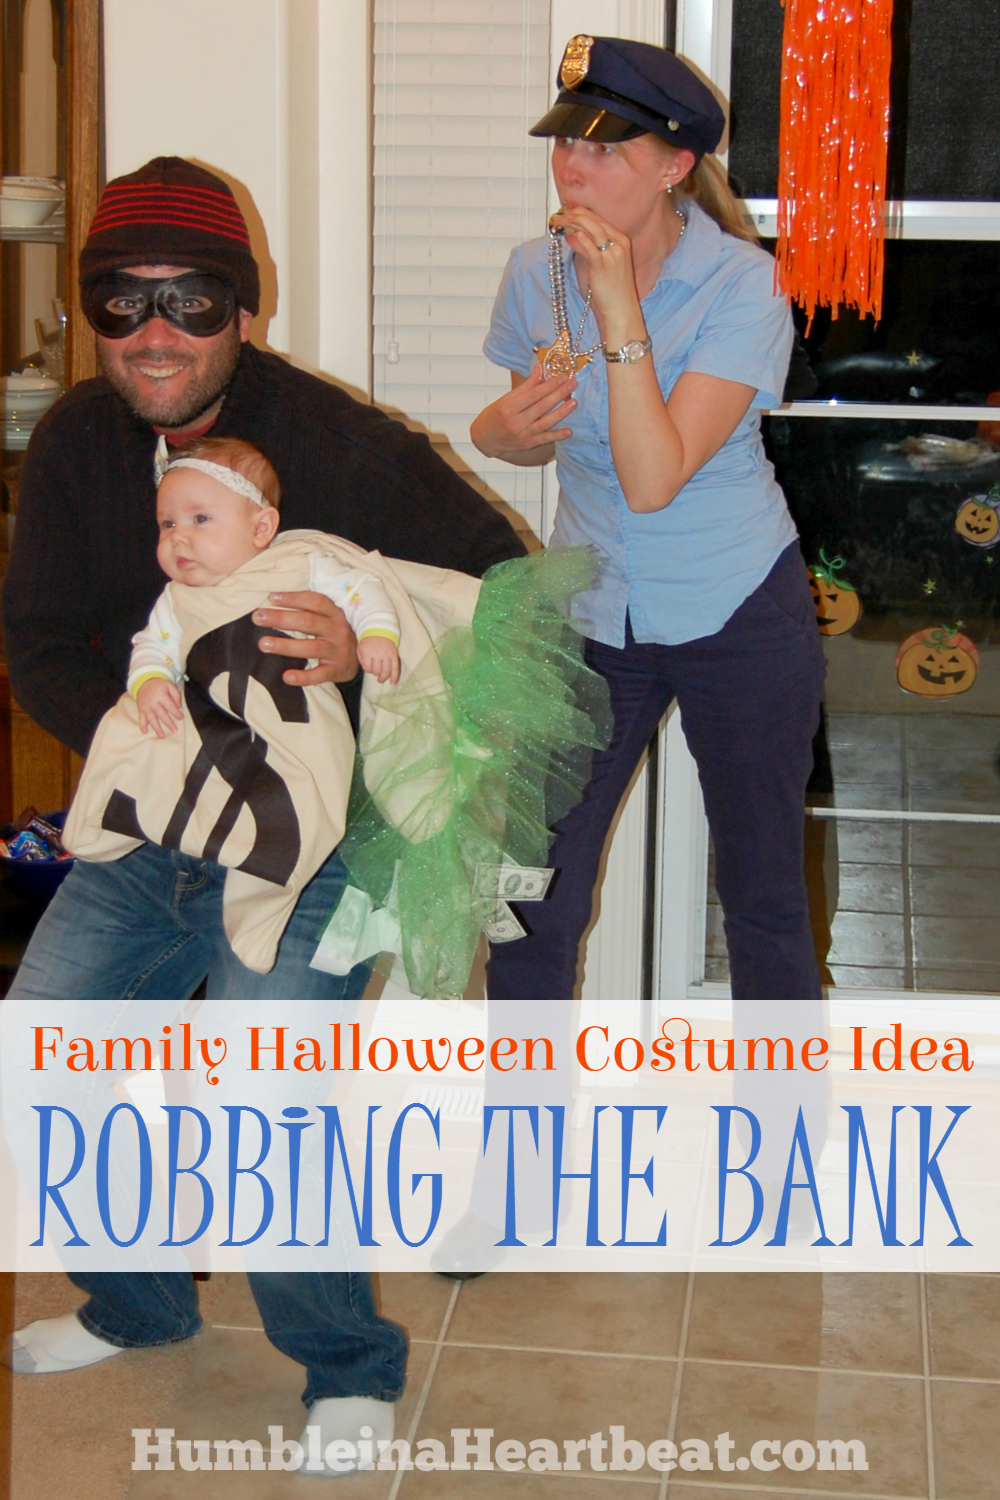 Need a Halloween costume idea for your new little family? If you have a baby younger than about 5 months, this group costume would work well and be lots of fun!